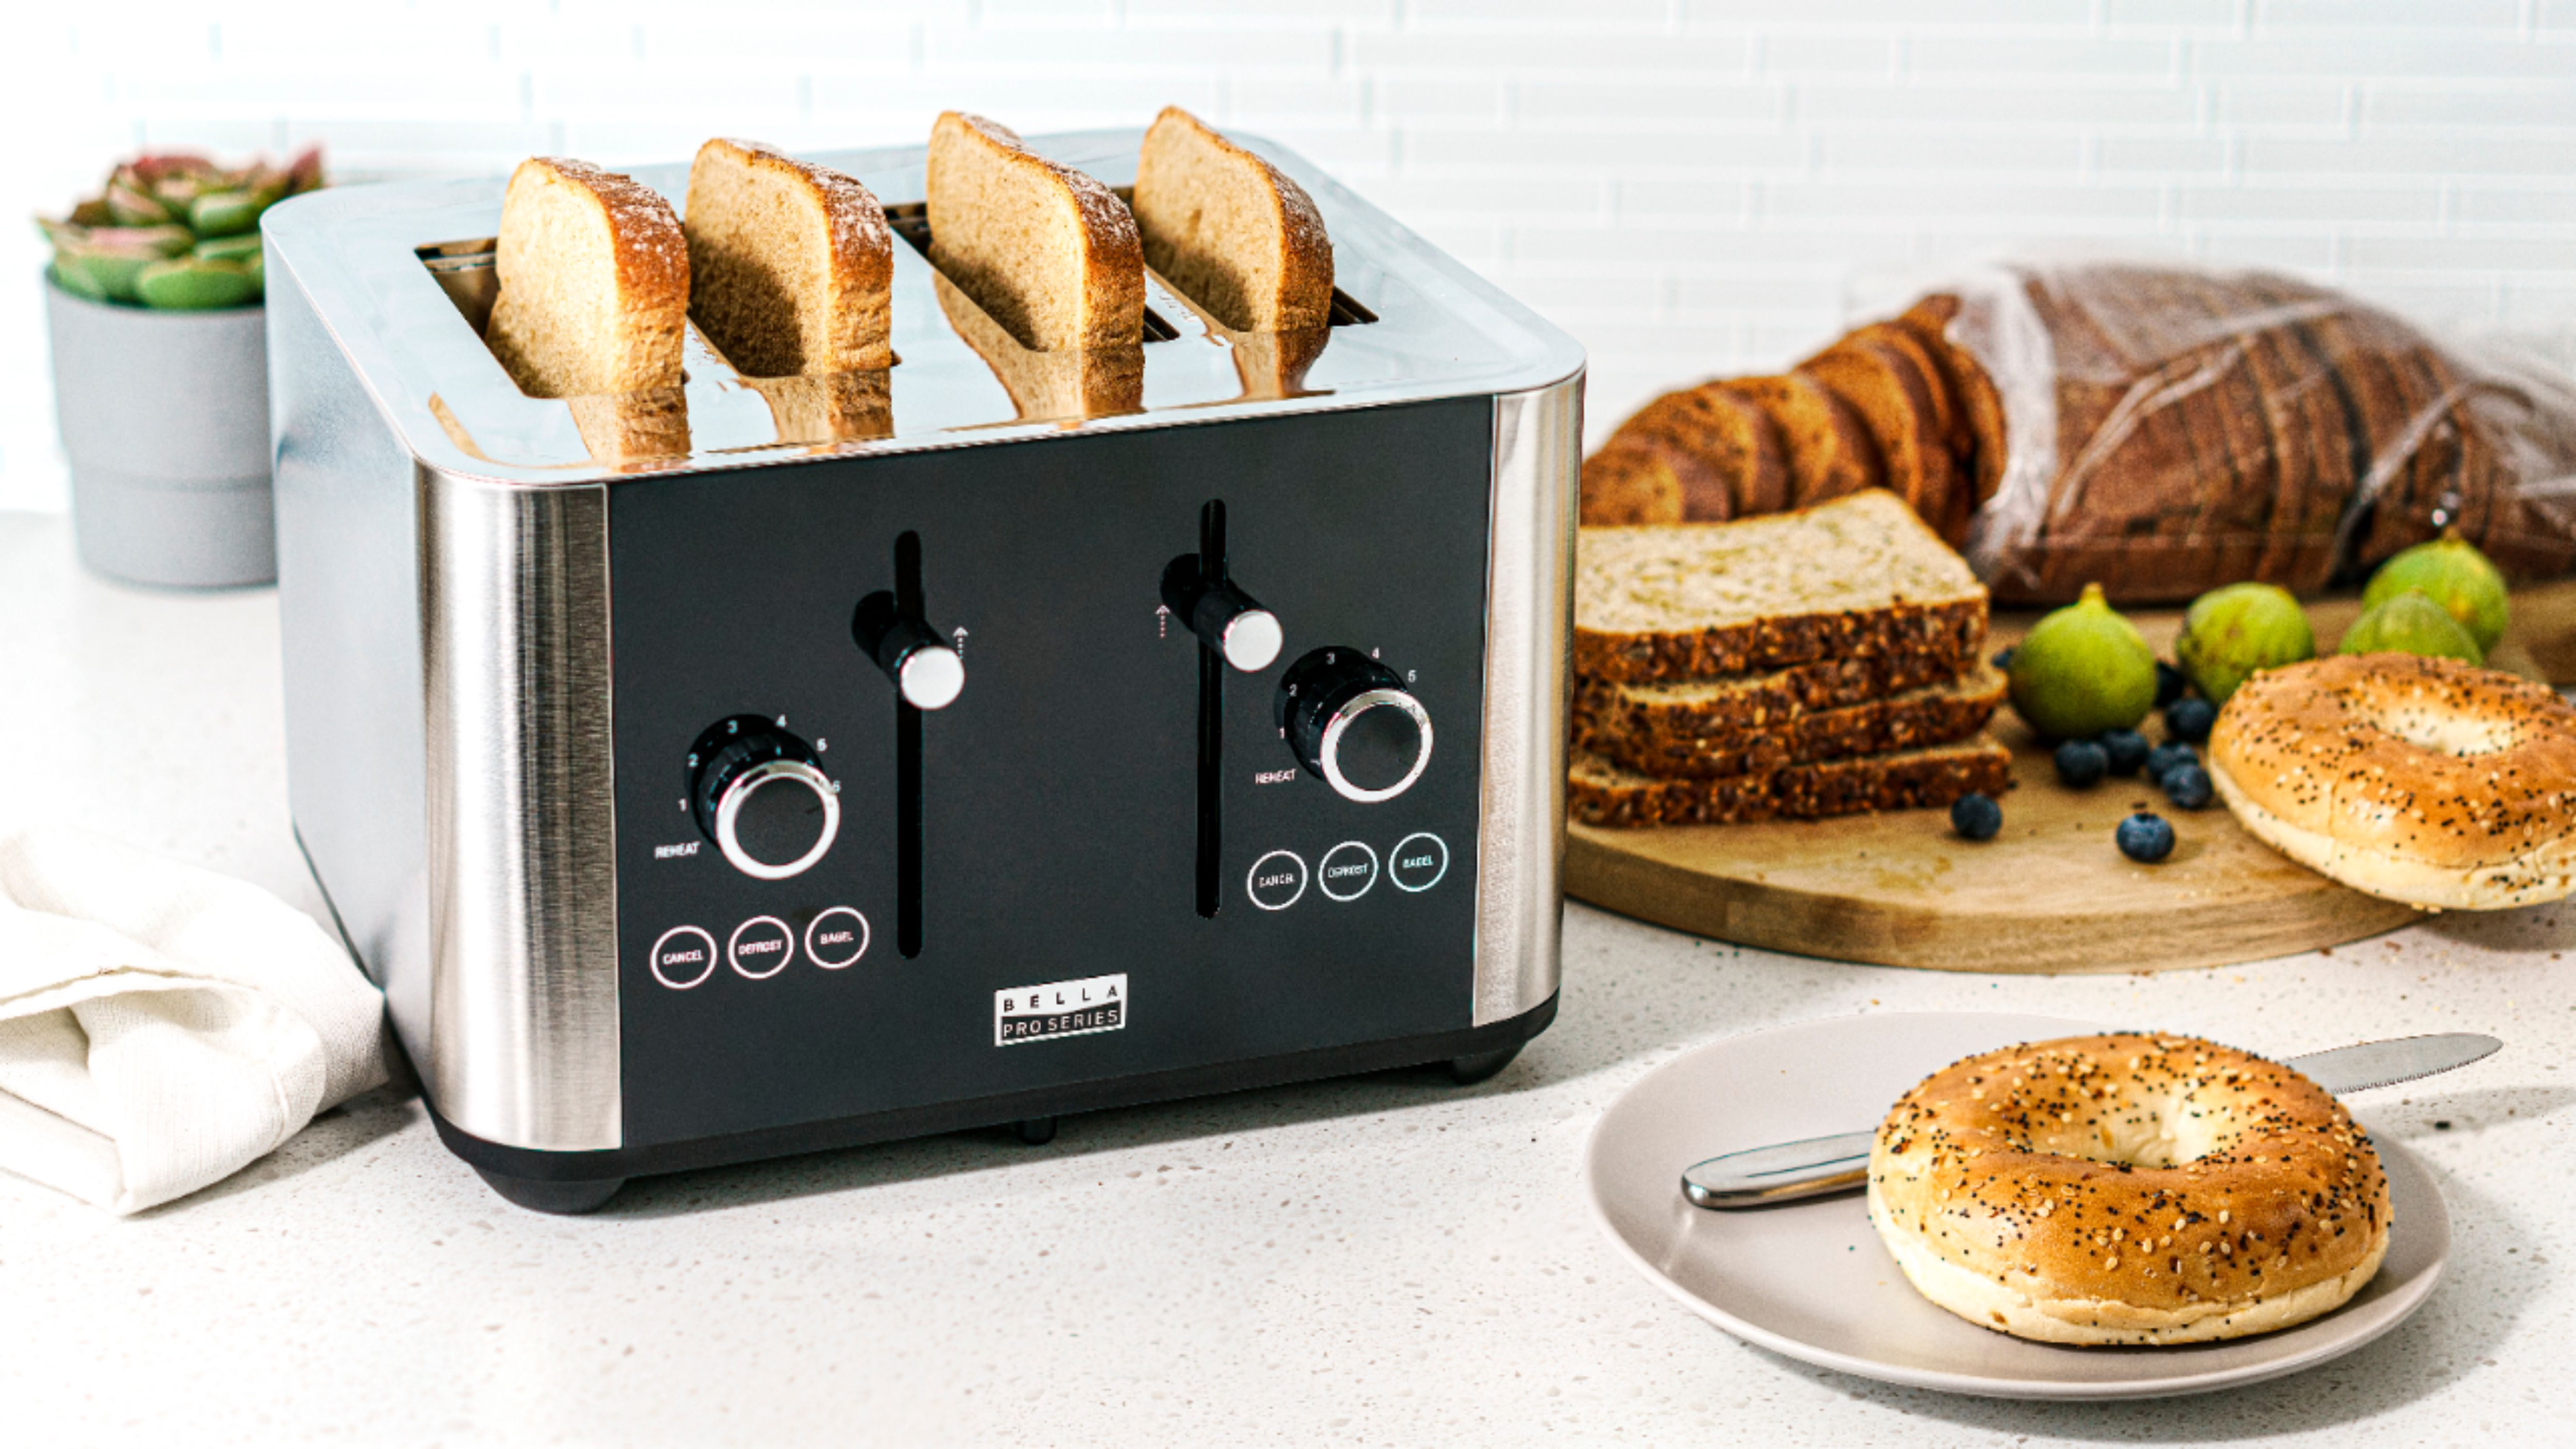 Bella 4 Slice Toaster, Long Slot & Removable Crumb Tray, 7 Shading options with Auto Shut Off, Cancel & Reheat Button, Toast Bread & Bagel, White